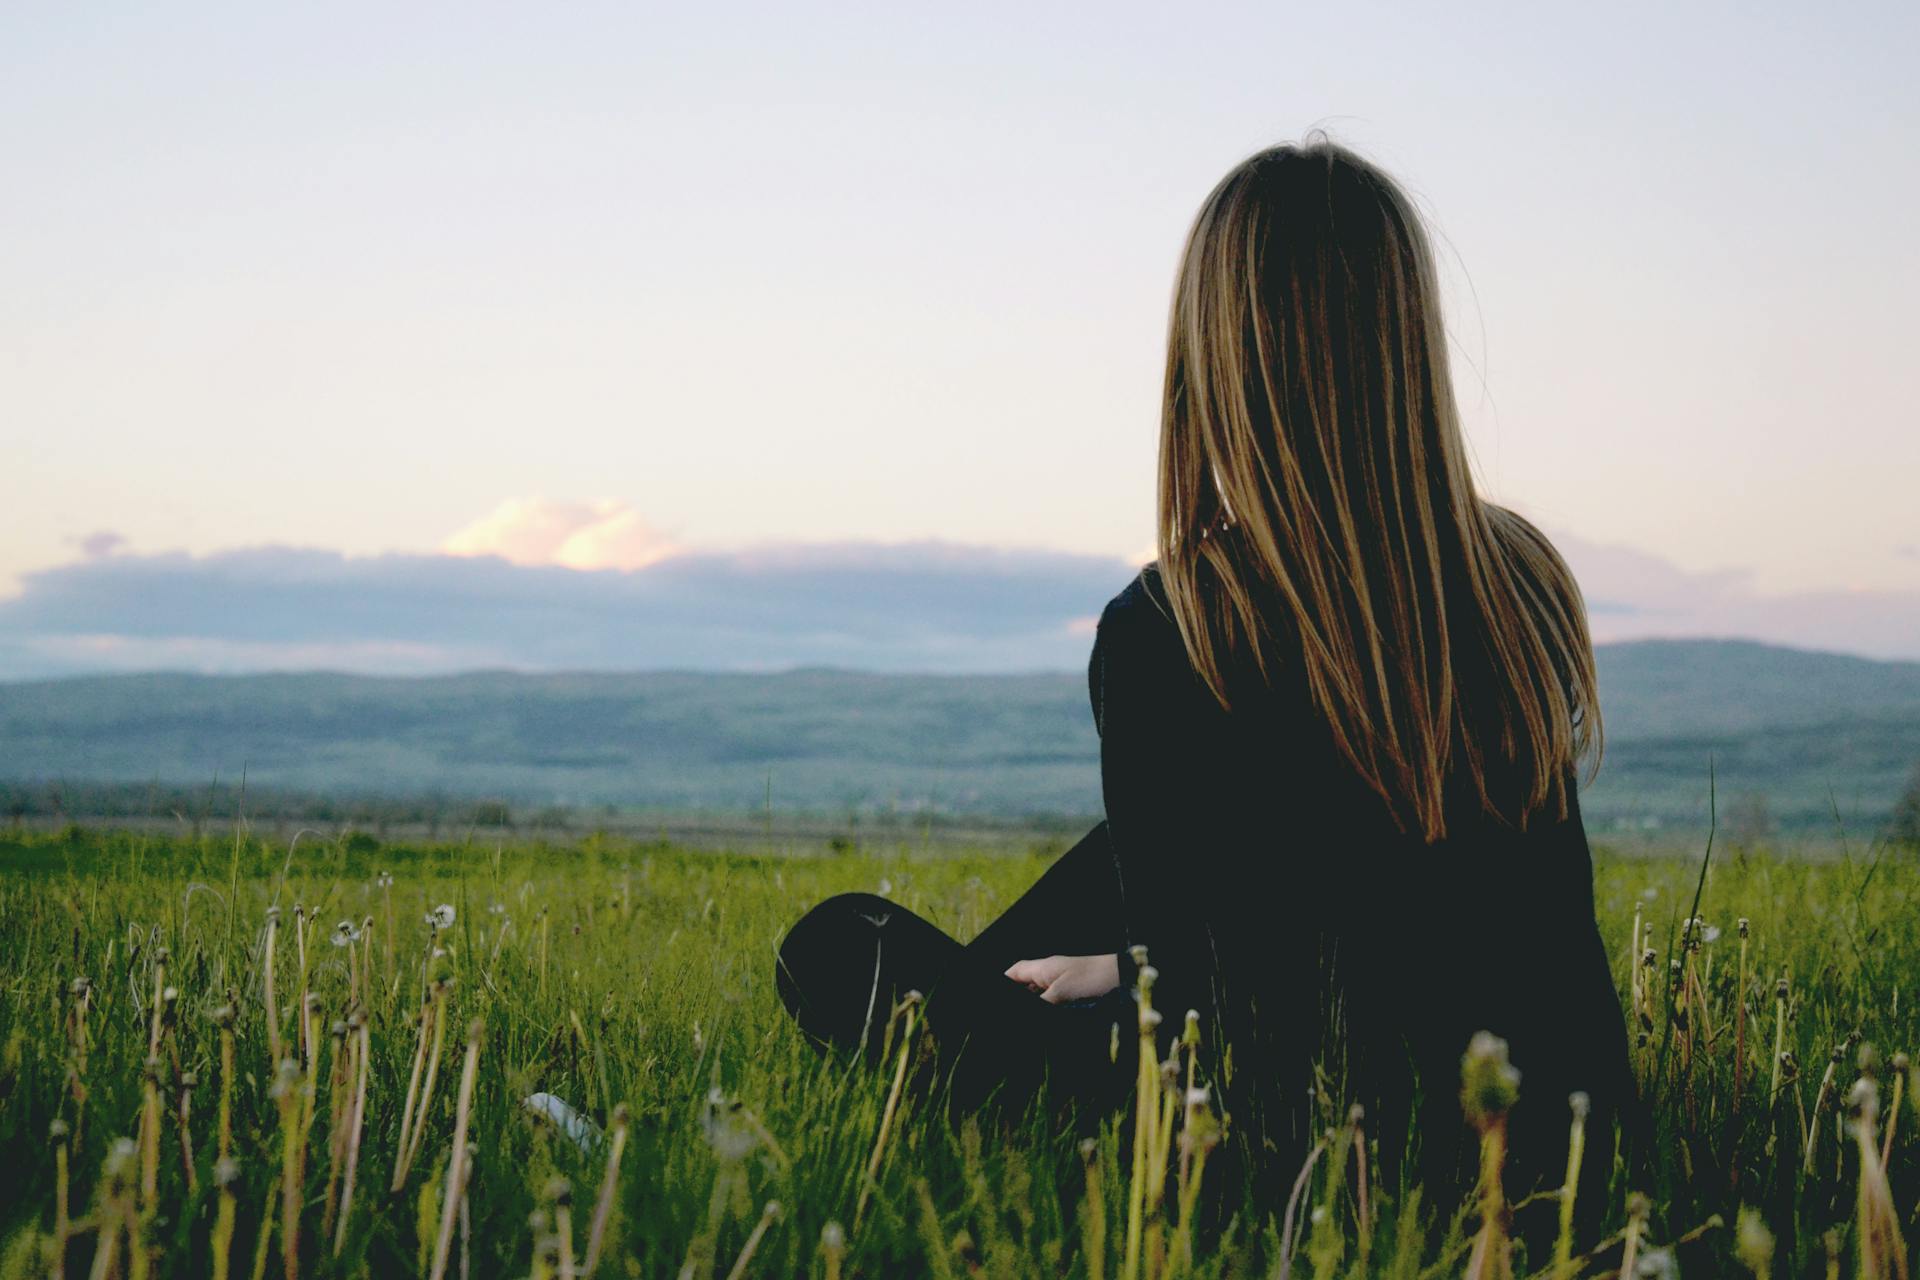 A woman sitting in a green field | Source: Pexels